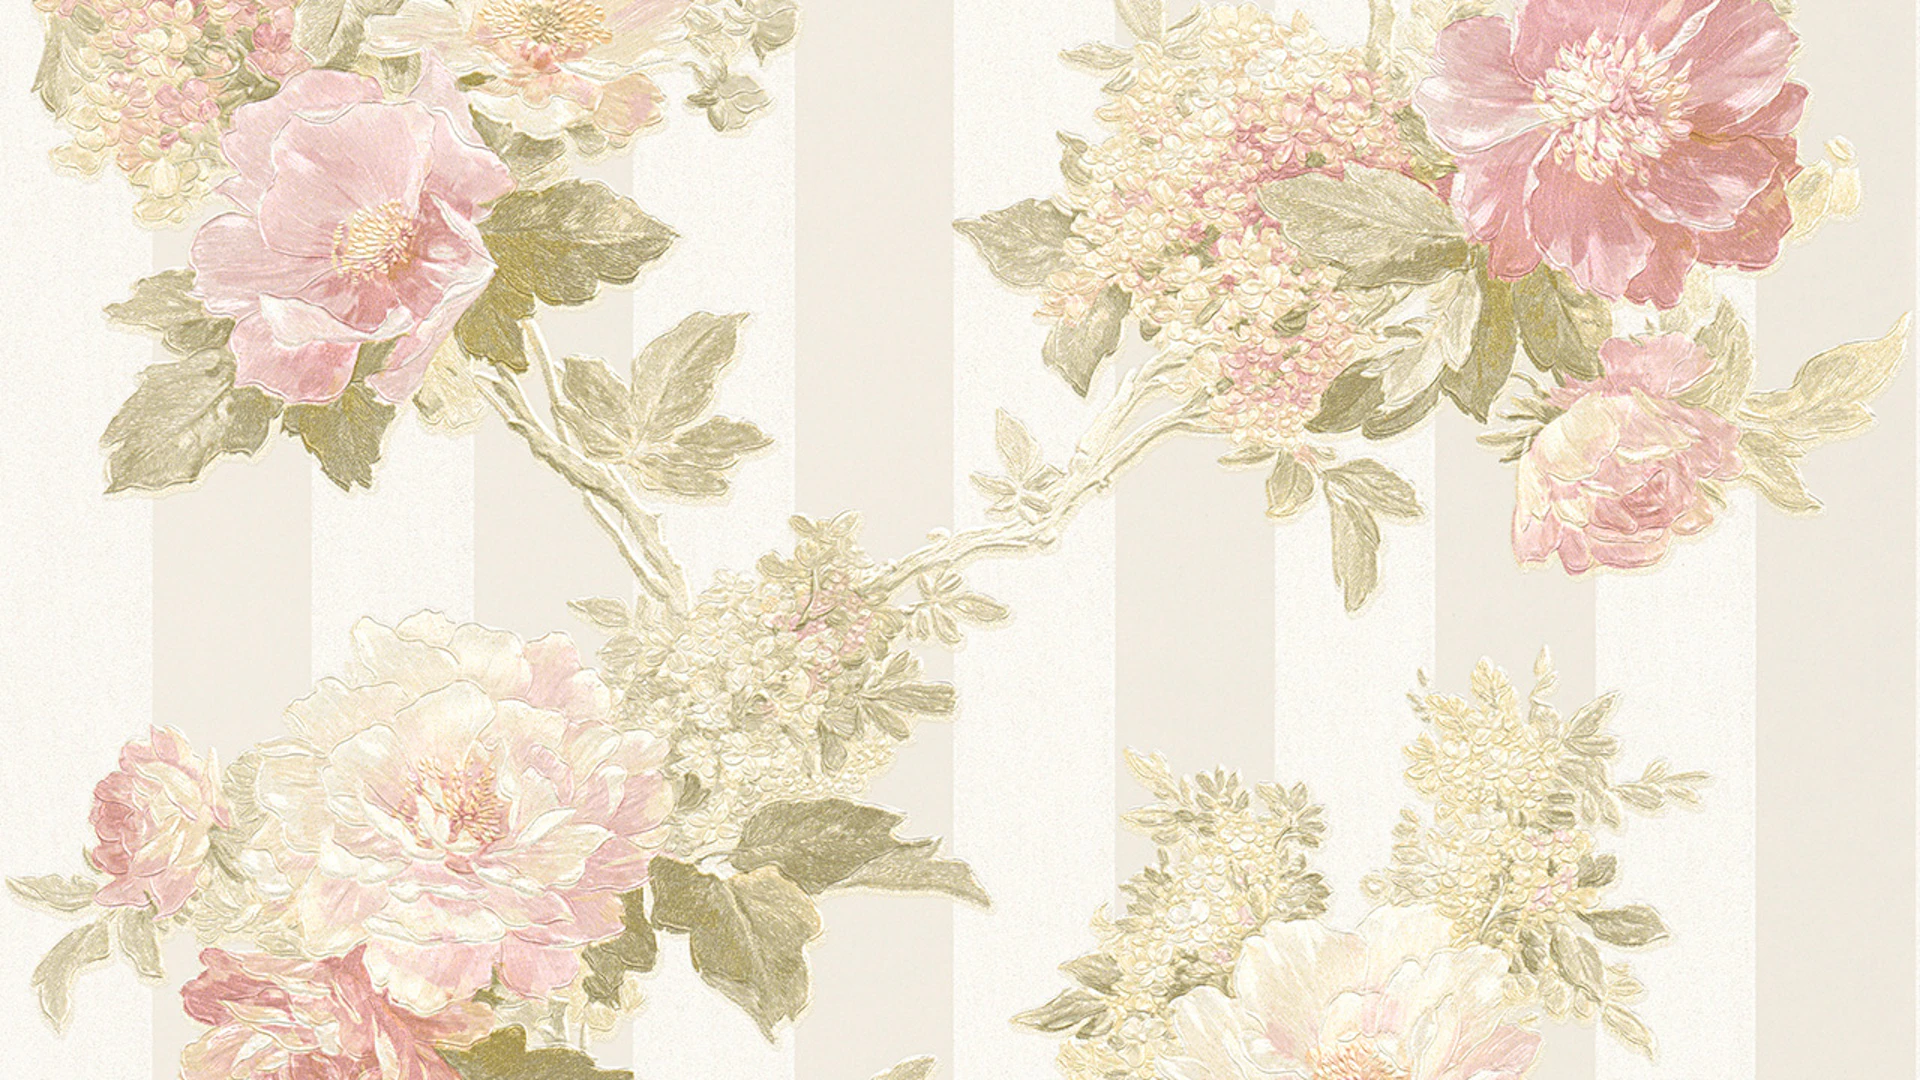 Vinyl wallpaper Best of non-woven A.S. Création Vintage Vintage floral cream green pink 461